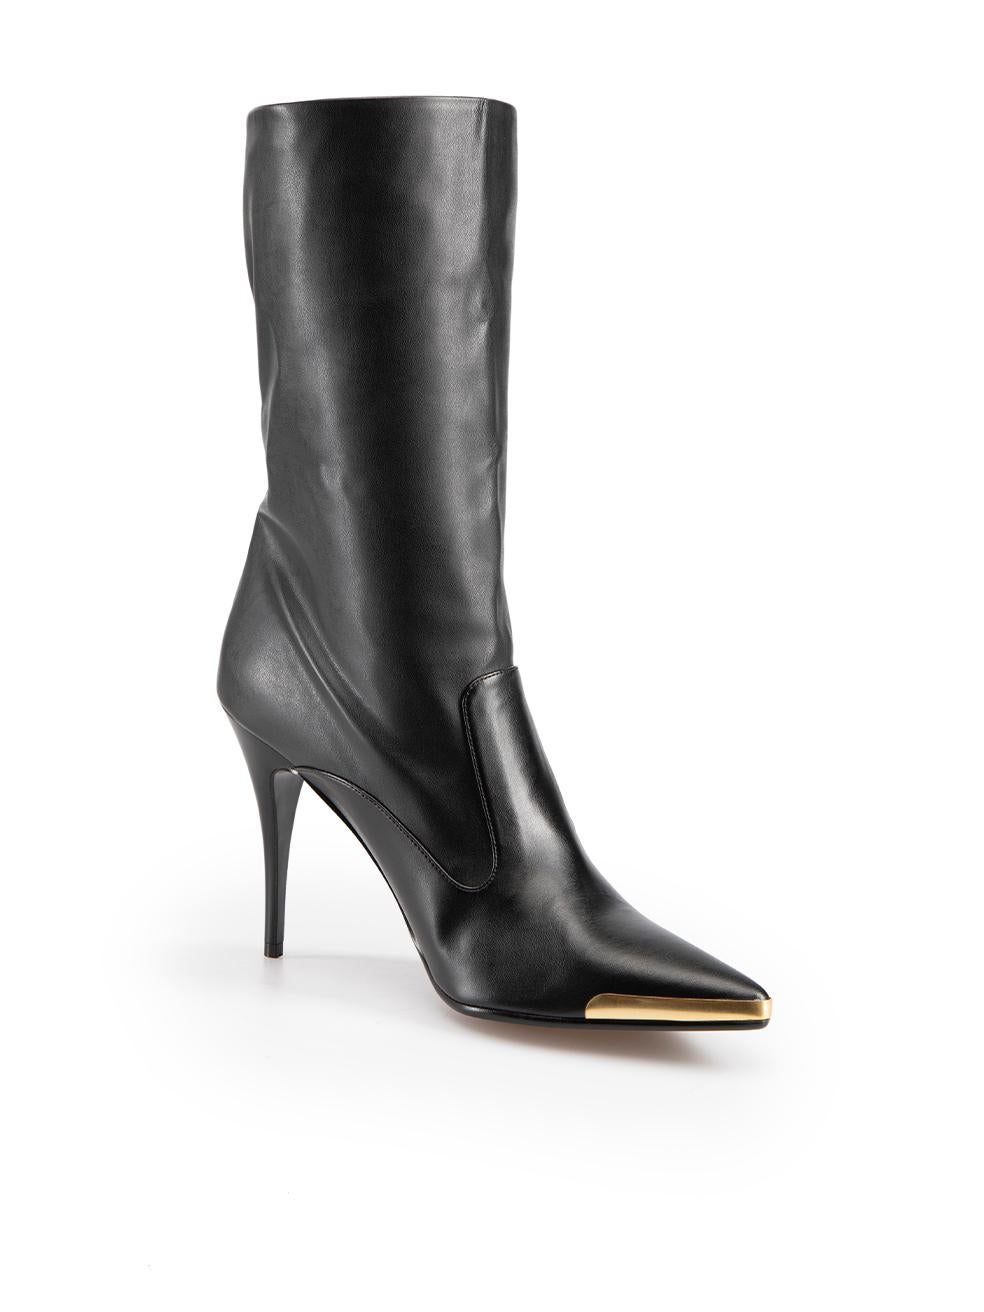 CONDITION is Never worn. No visible wear to boots is evident on this new Stella McCartney designer resale item. These boots come with original box.

Details
Cuban
Black
Vegan leather
Mid calf boots
Pointed toe
High heel
Gold tone metal plate on toe
